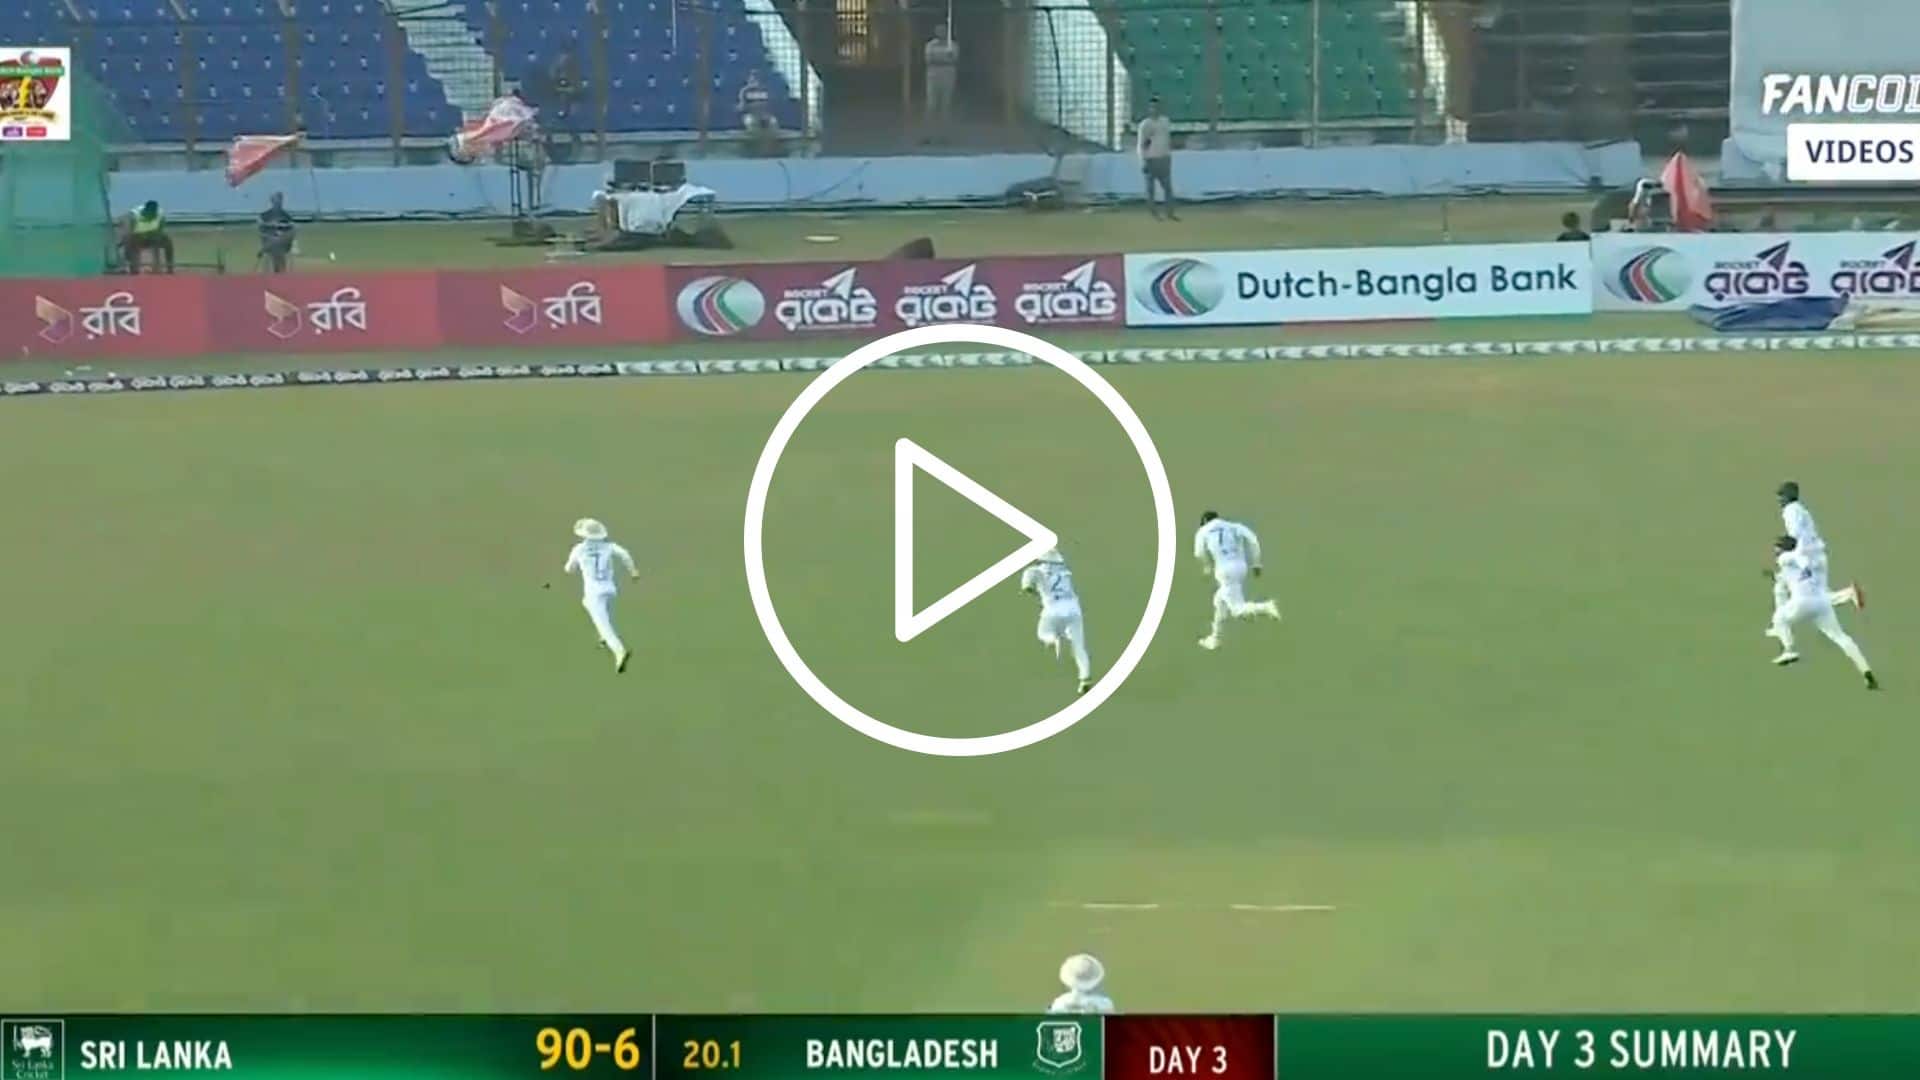 [Watch] Cricket Or Football? 5 Bangladesh Players Run To Stop The Ball In 2nd Test Vs SL